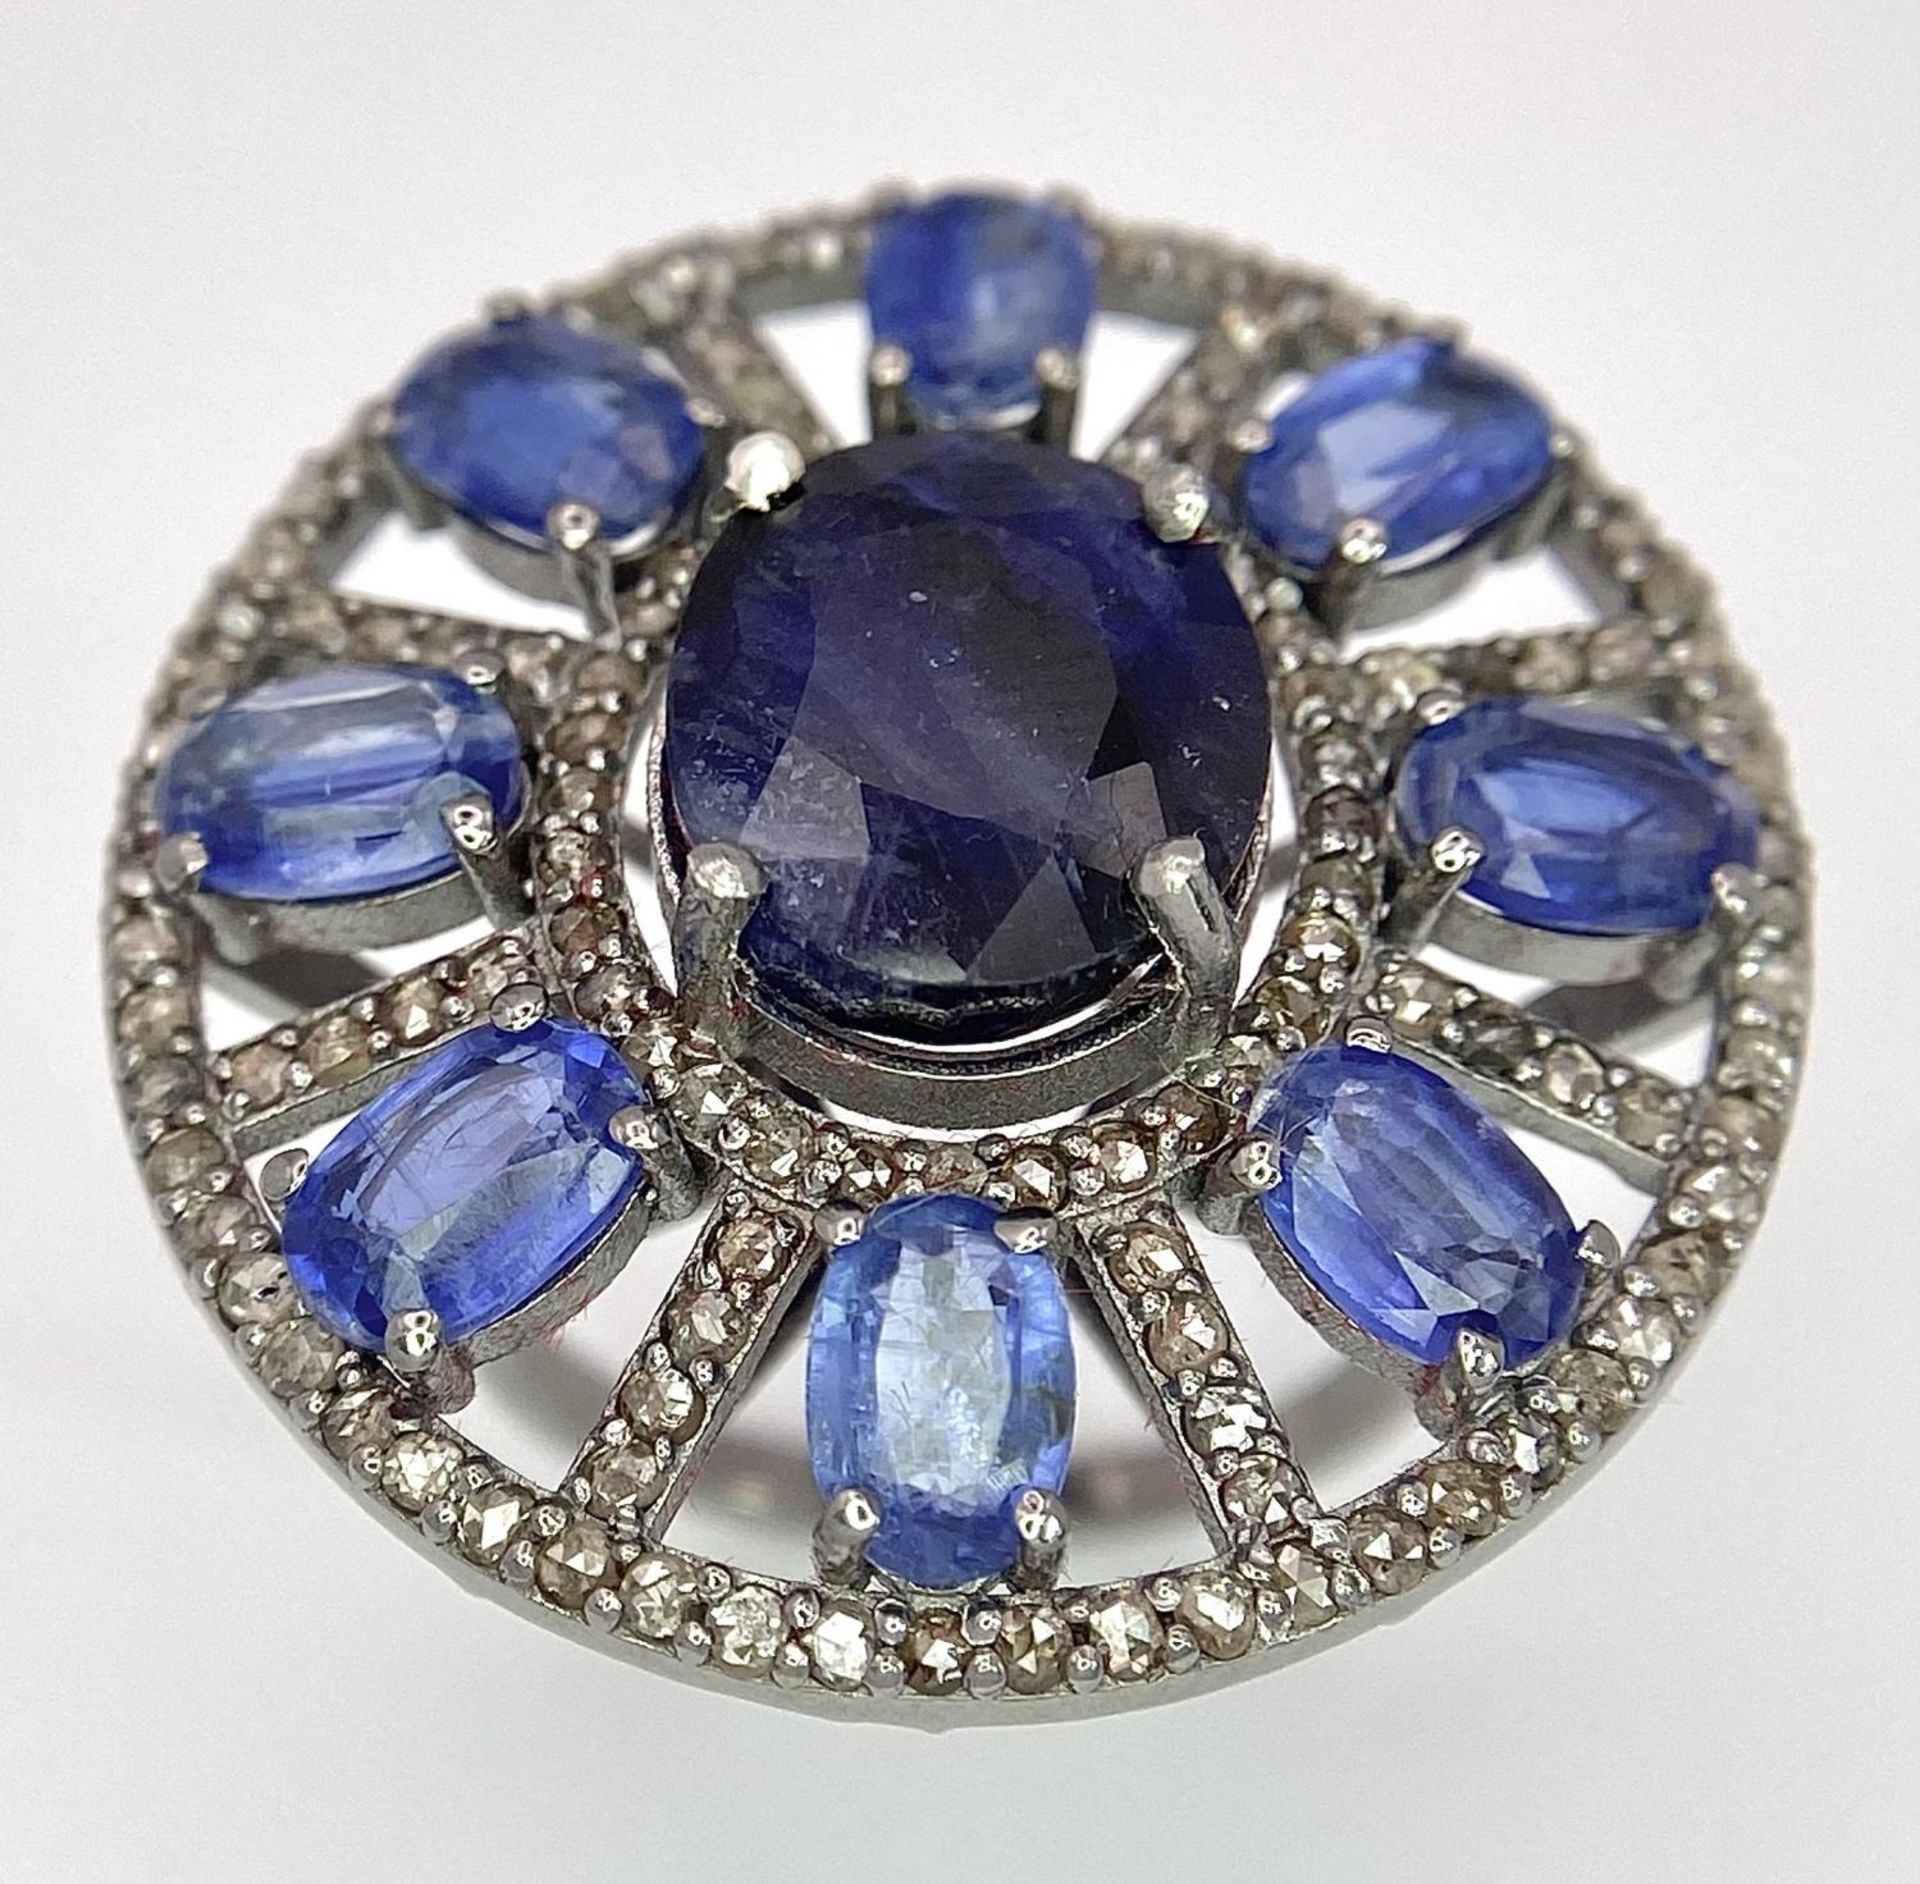 A 10ct Topaz Ring with 6.15ctw of Kyanite surround and 0.50ctw of Diamond Accents. Set in 925 - Image 2 of 6